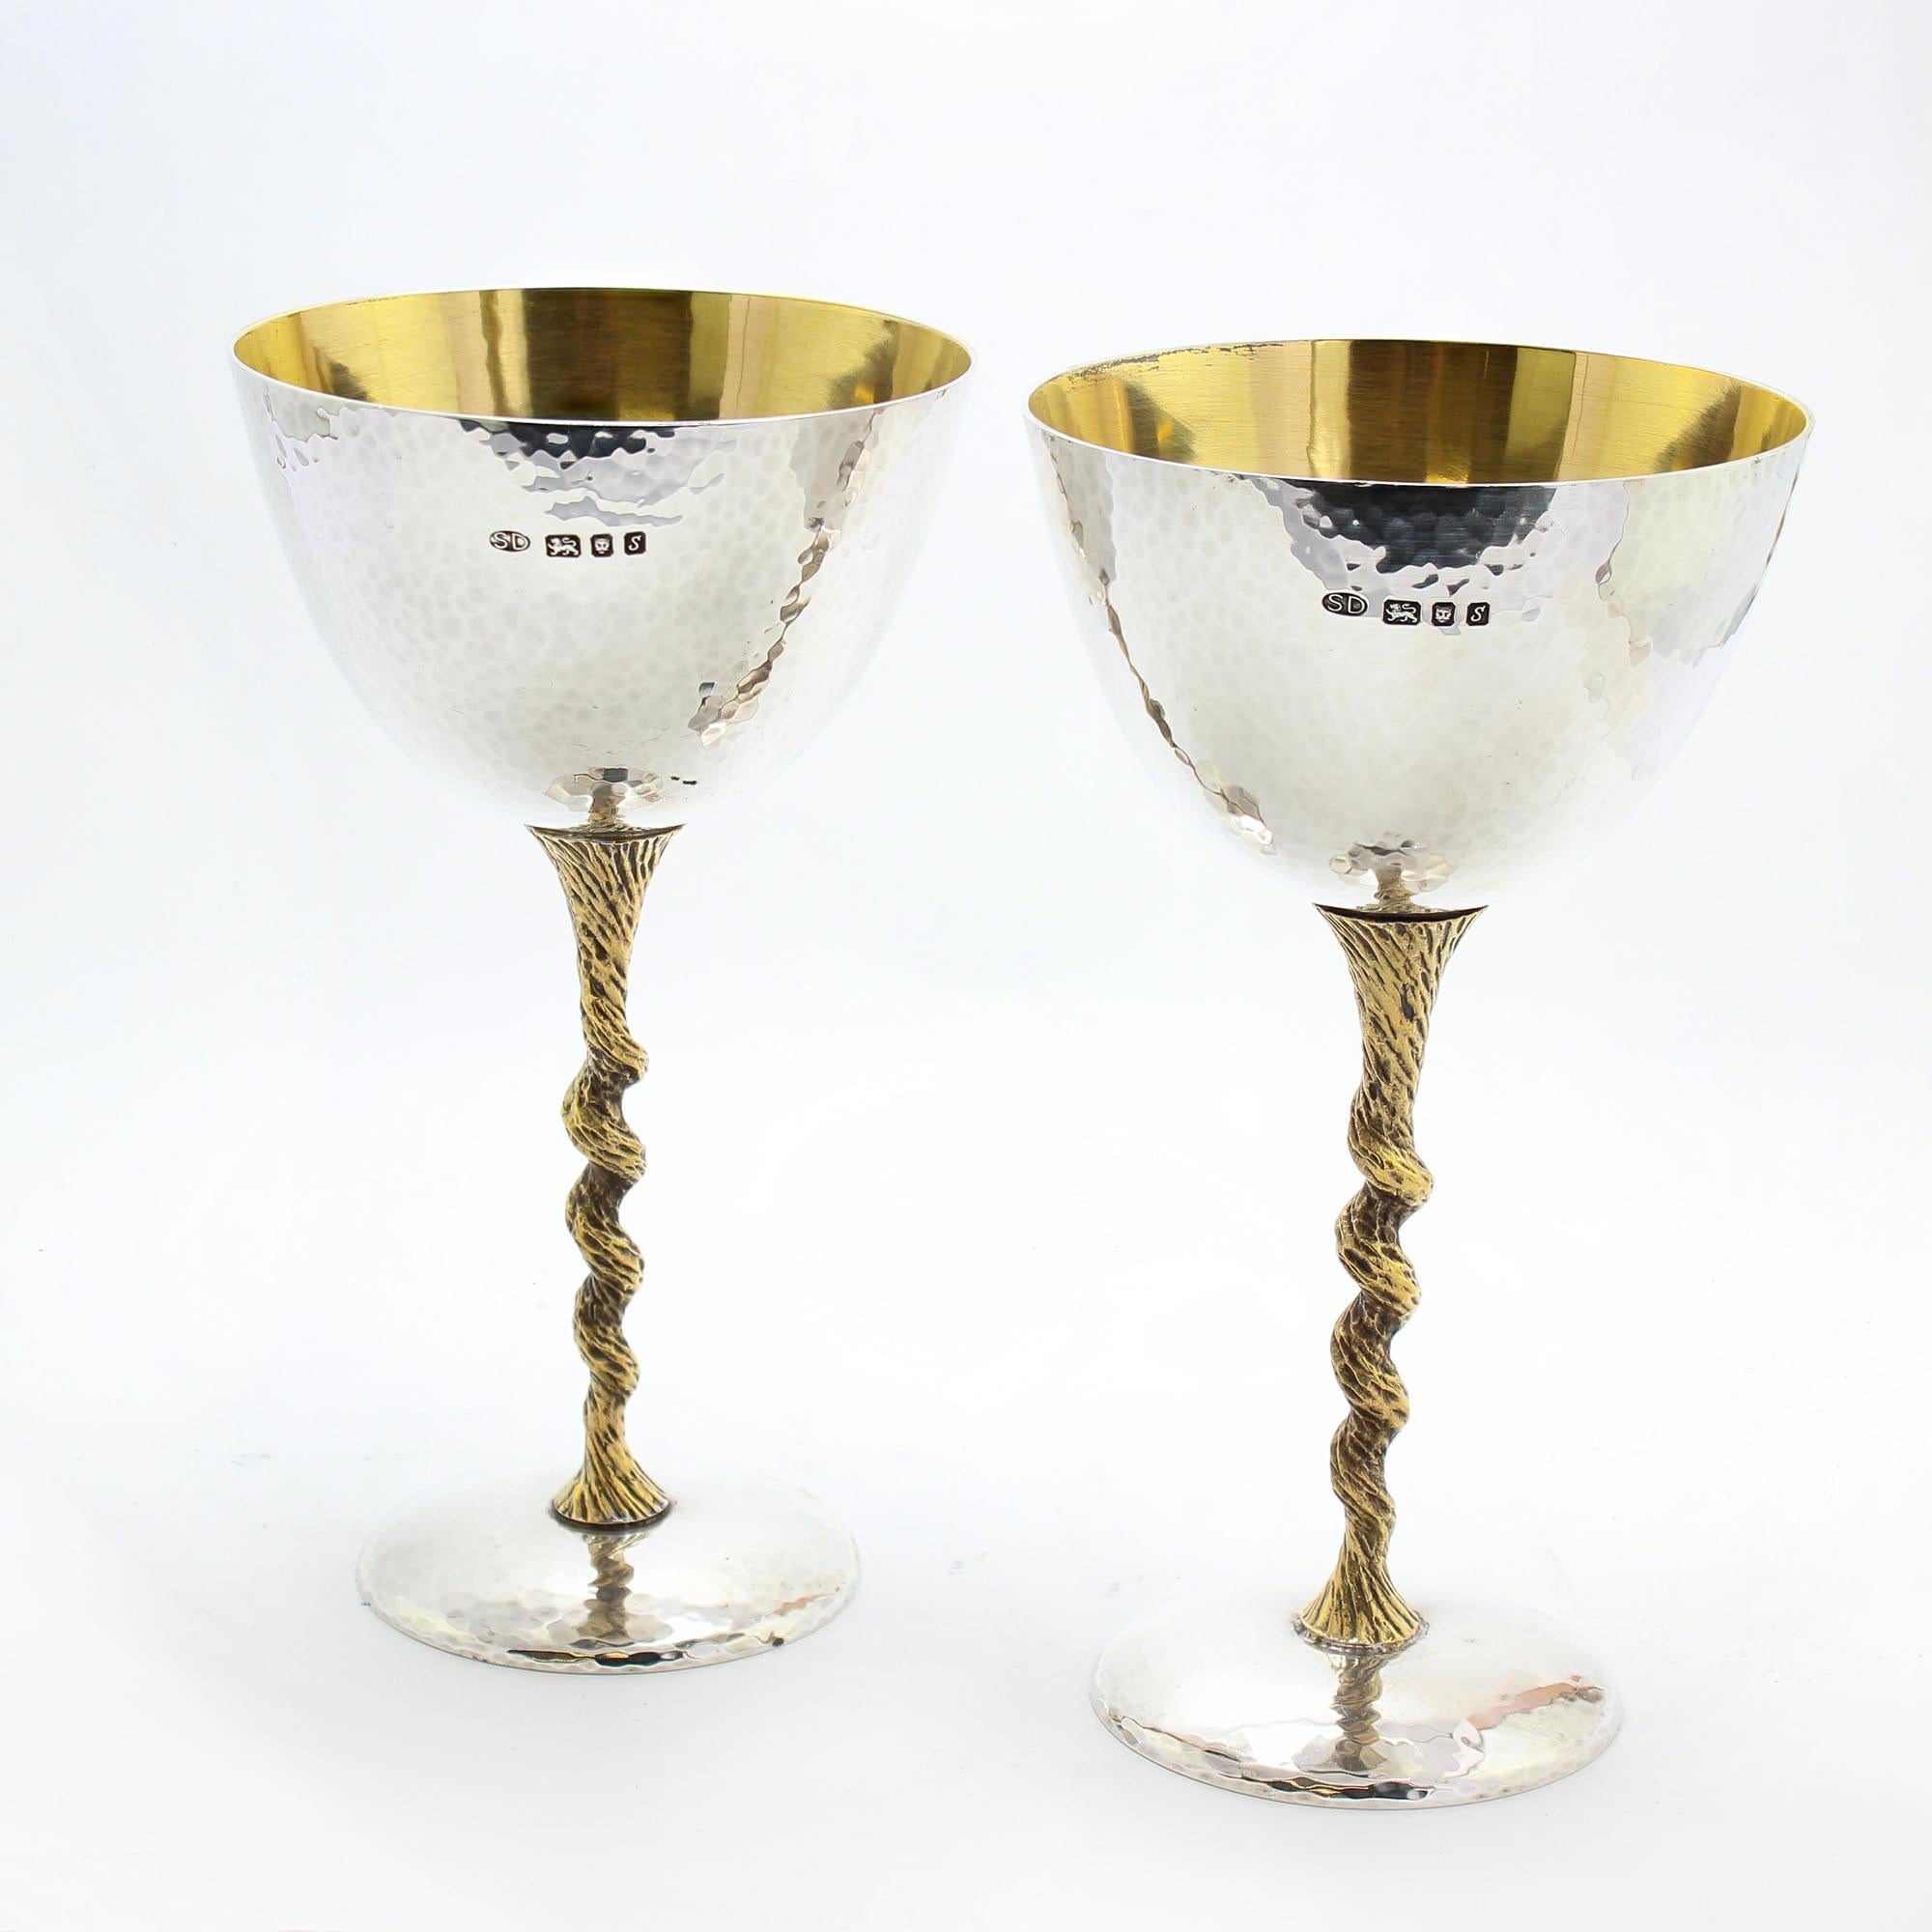 Sophistication from the 1970s, these sterling silver champagne flutes bear designs by the legendary Stuart Devlin.
Stuart Devlin's work can be found in award-winning hotels and restaurants around the world.

A stunning and refined addition to